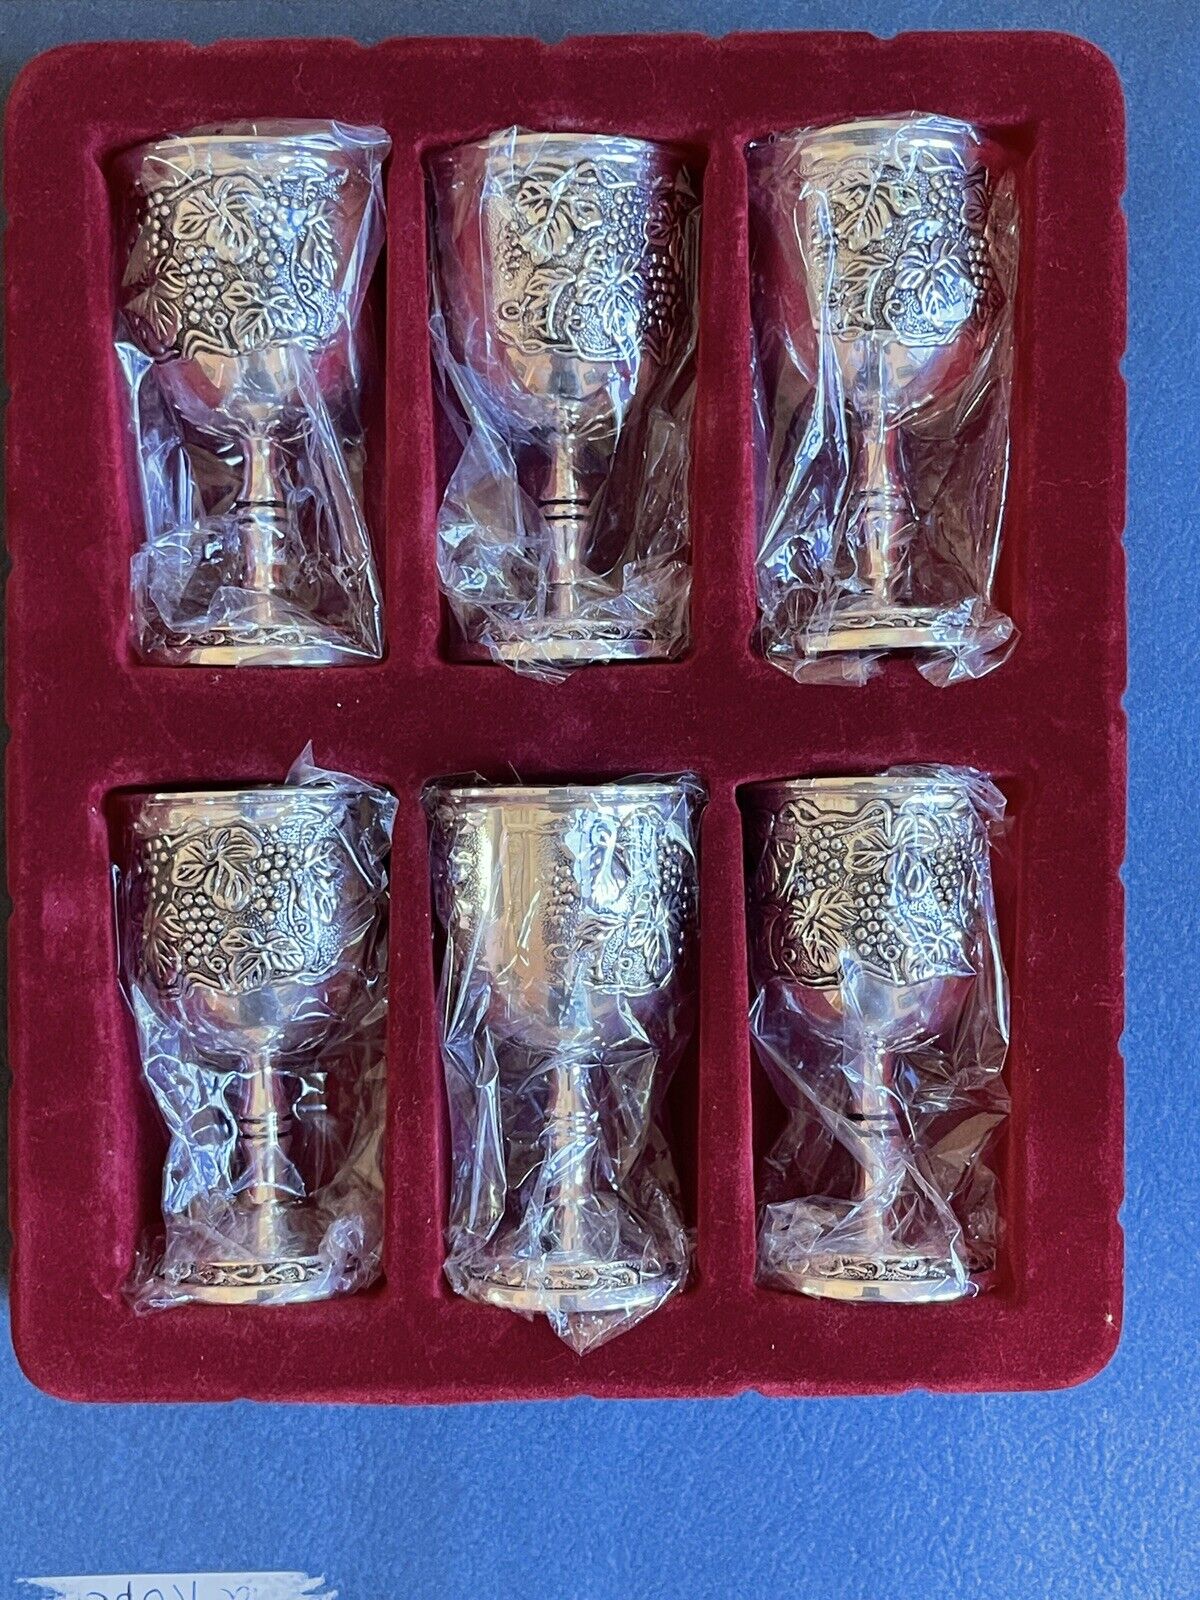 Vintage Kiddush Judaica Set Of 6 Pcs Silver Plate Cups, H=3”, New, Open Box